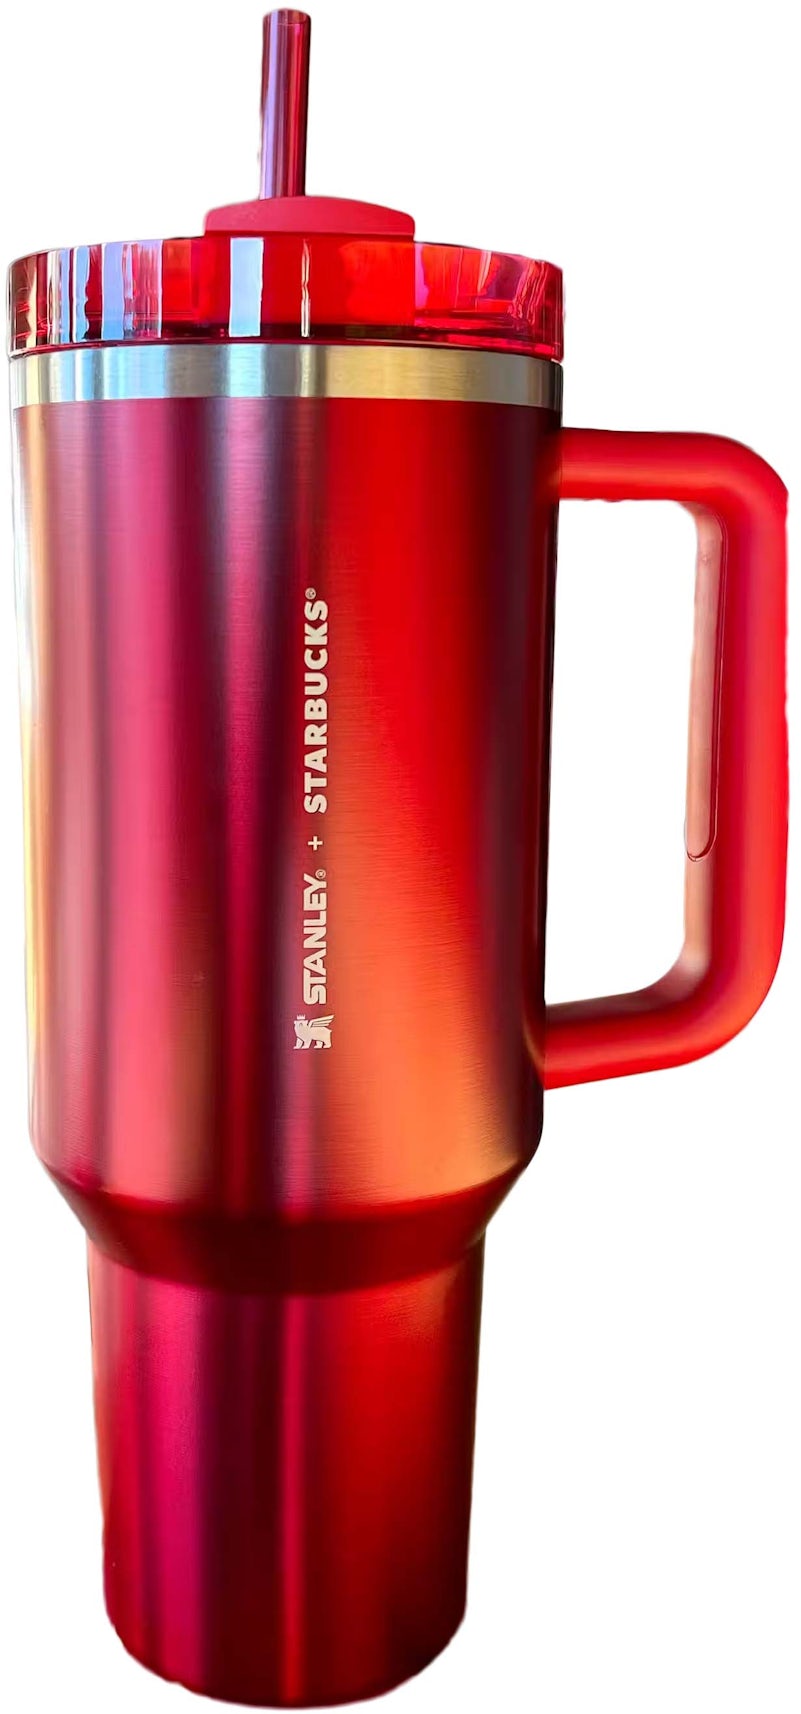 New Stanley X Starbucks Cup Red